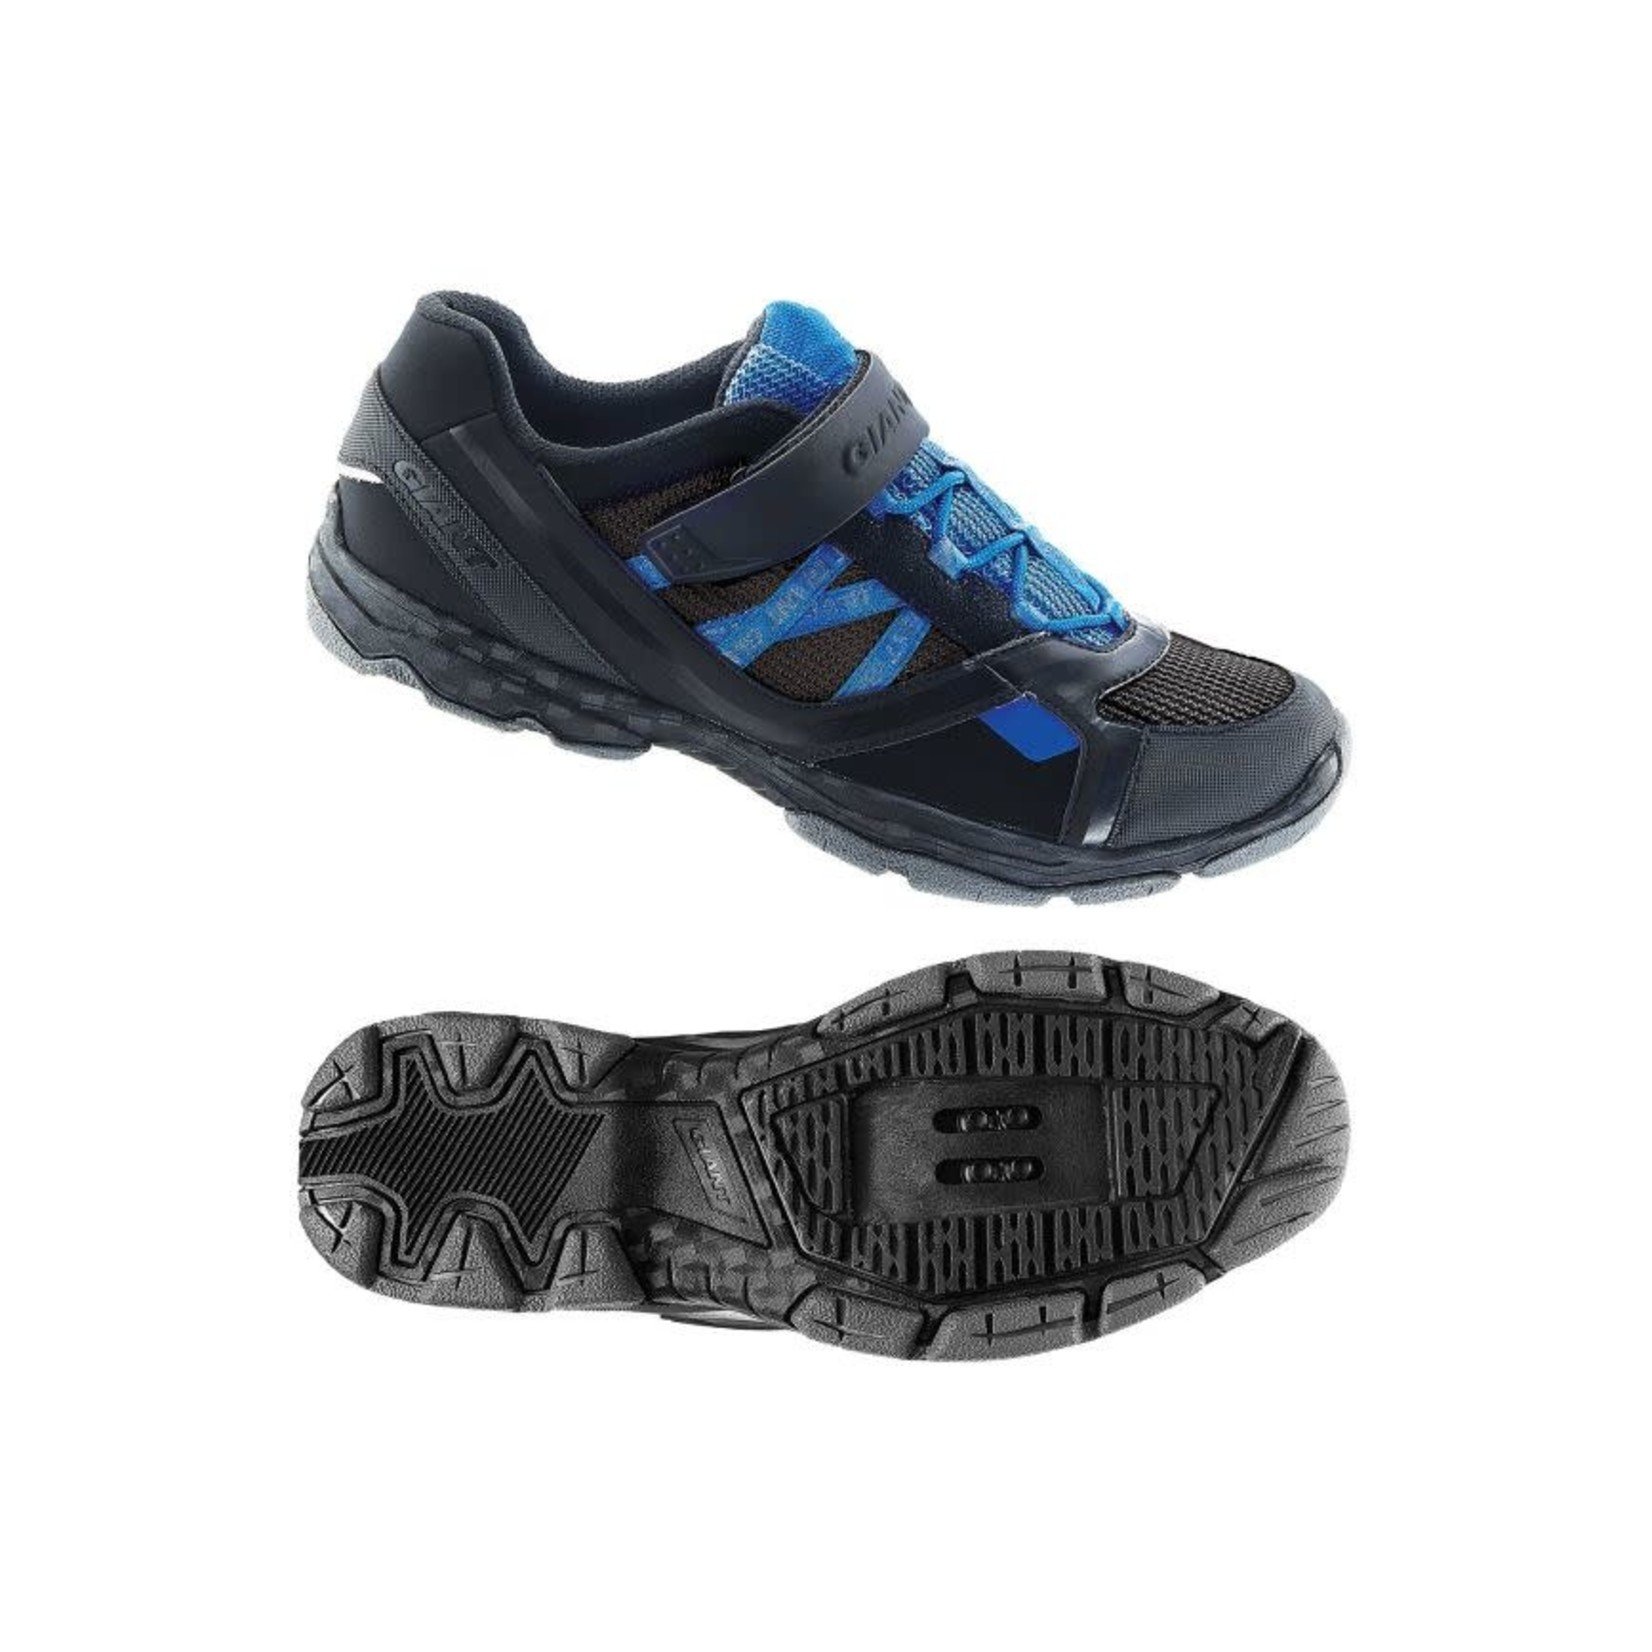 Giant GNT Sojourn 1 Cycling Shoe 45 Black/Blue